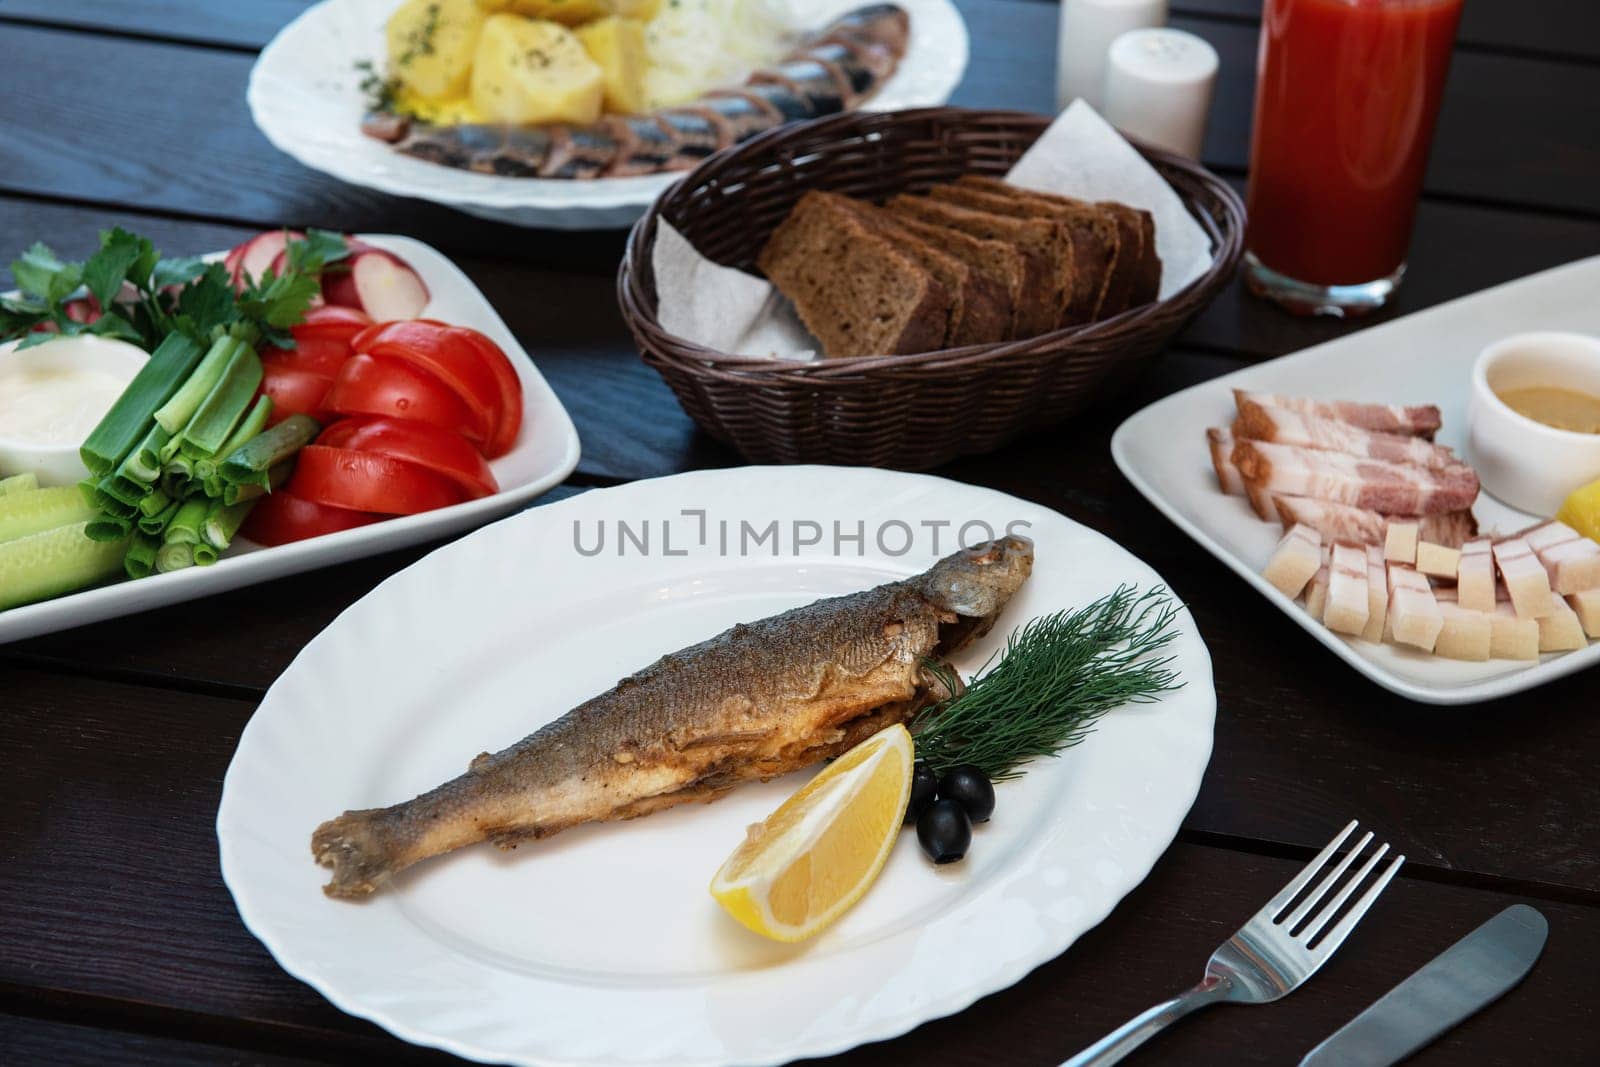 Fried grayling fish on a plate with any appetizers on swimming pool background. Resting and relaxing concept.